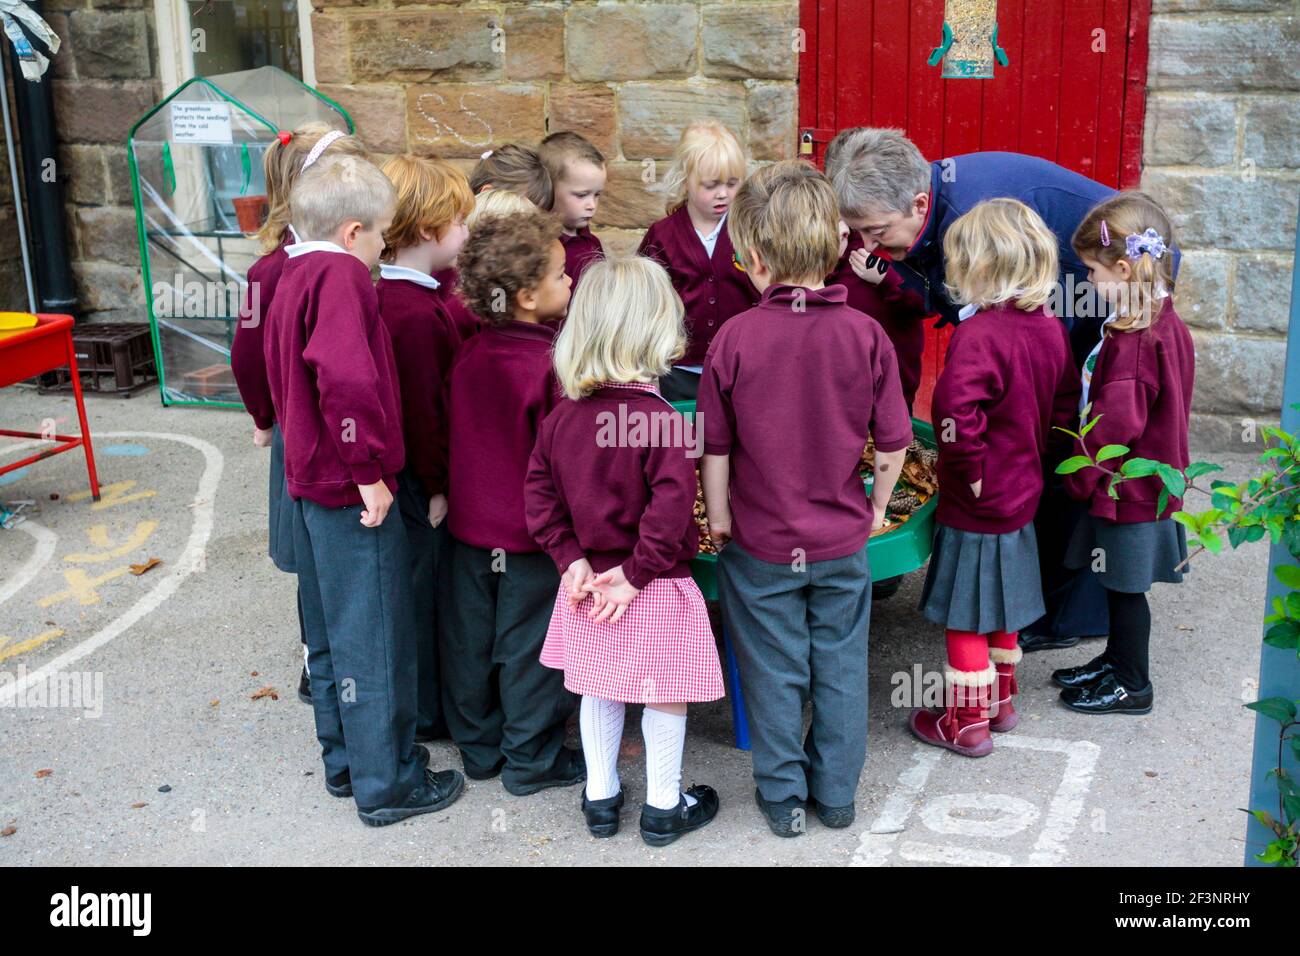 Primary school children learning about nature in an outdoor classroom. Stock Photo